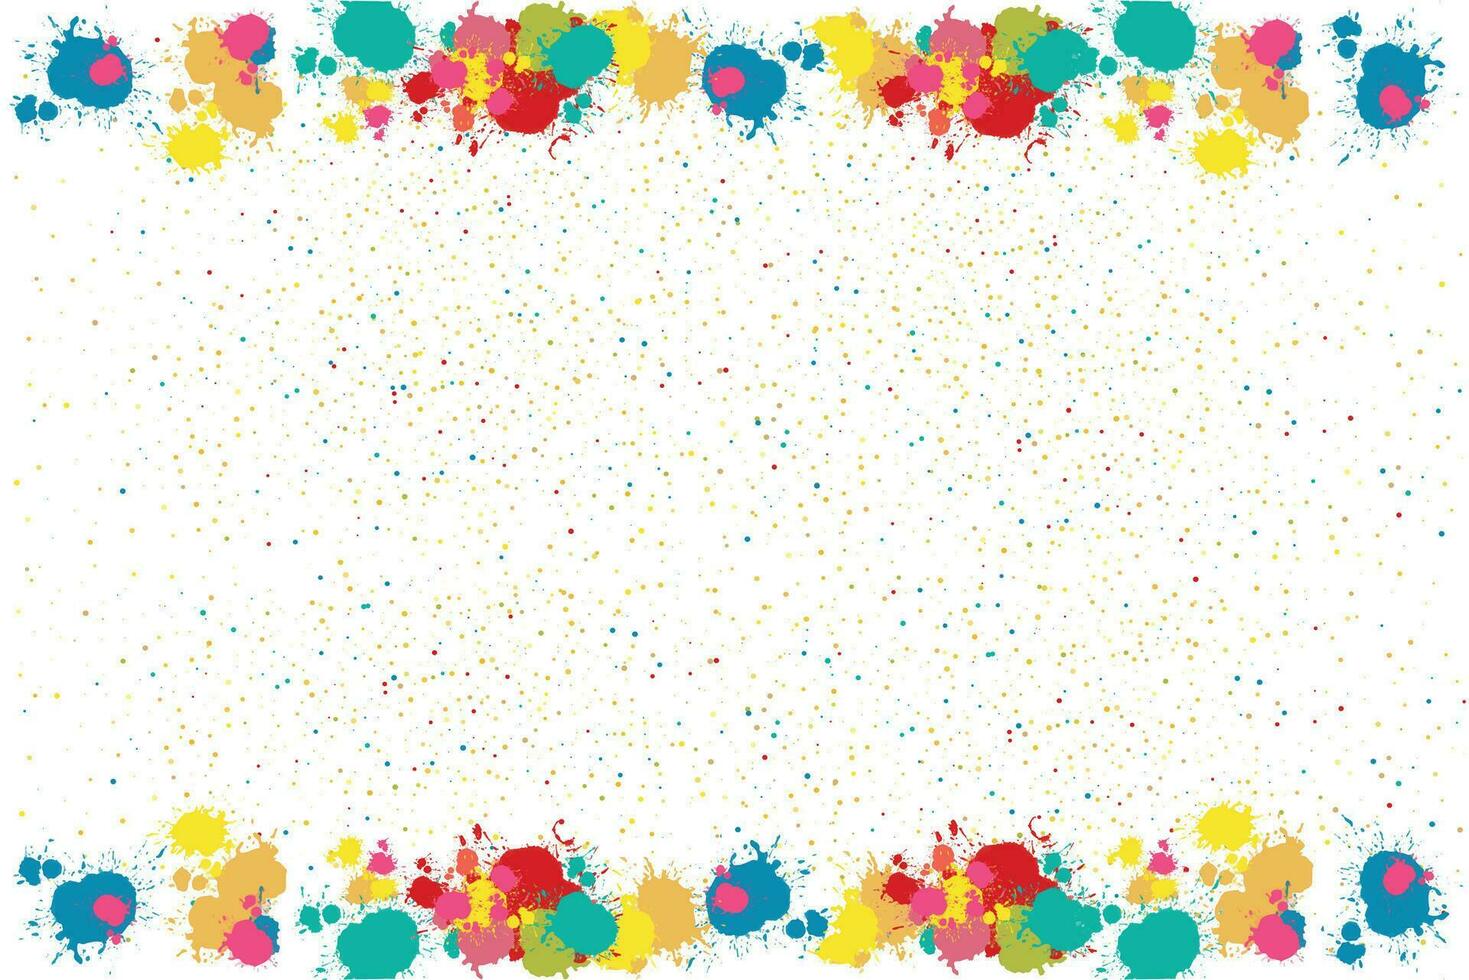 Background with watercolor splashes. Paint stain. Grunge texture colors. Splashes of rainbow paint for your design. Vector